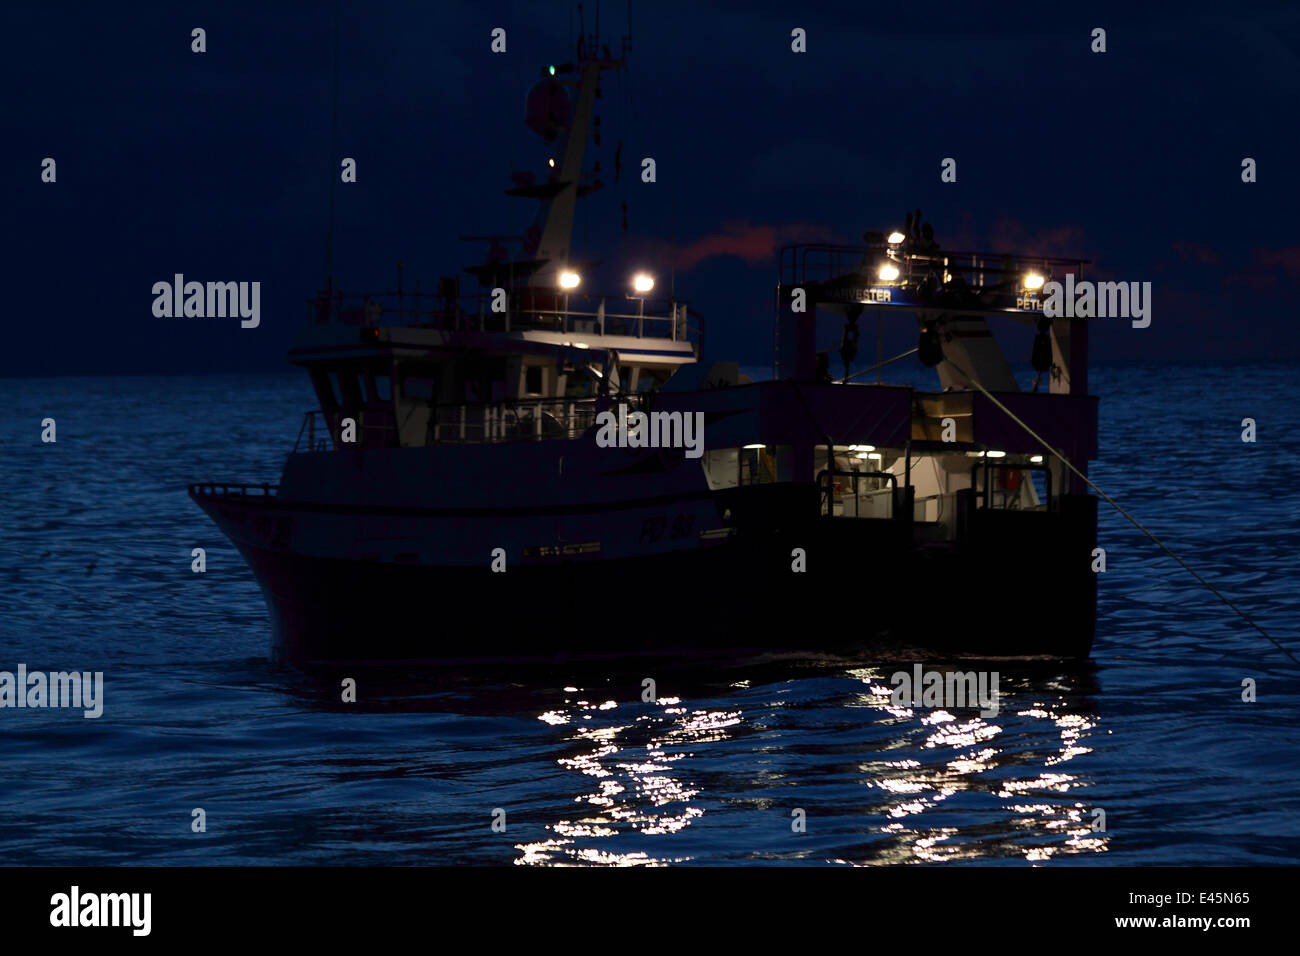 Fishing vessel Harvester trawling at twilight on the North Sea. February 2010. Property released. Stock Photo